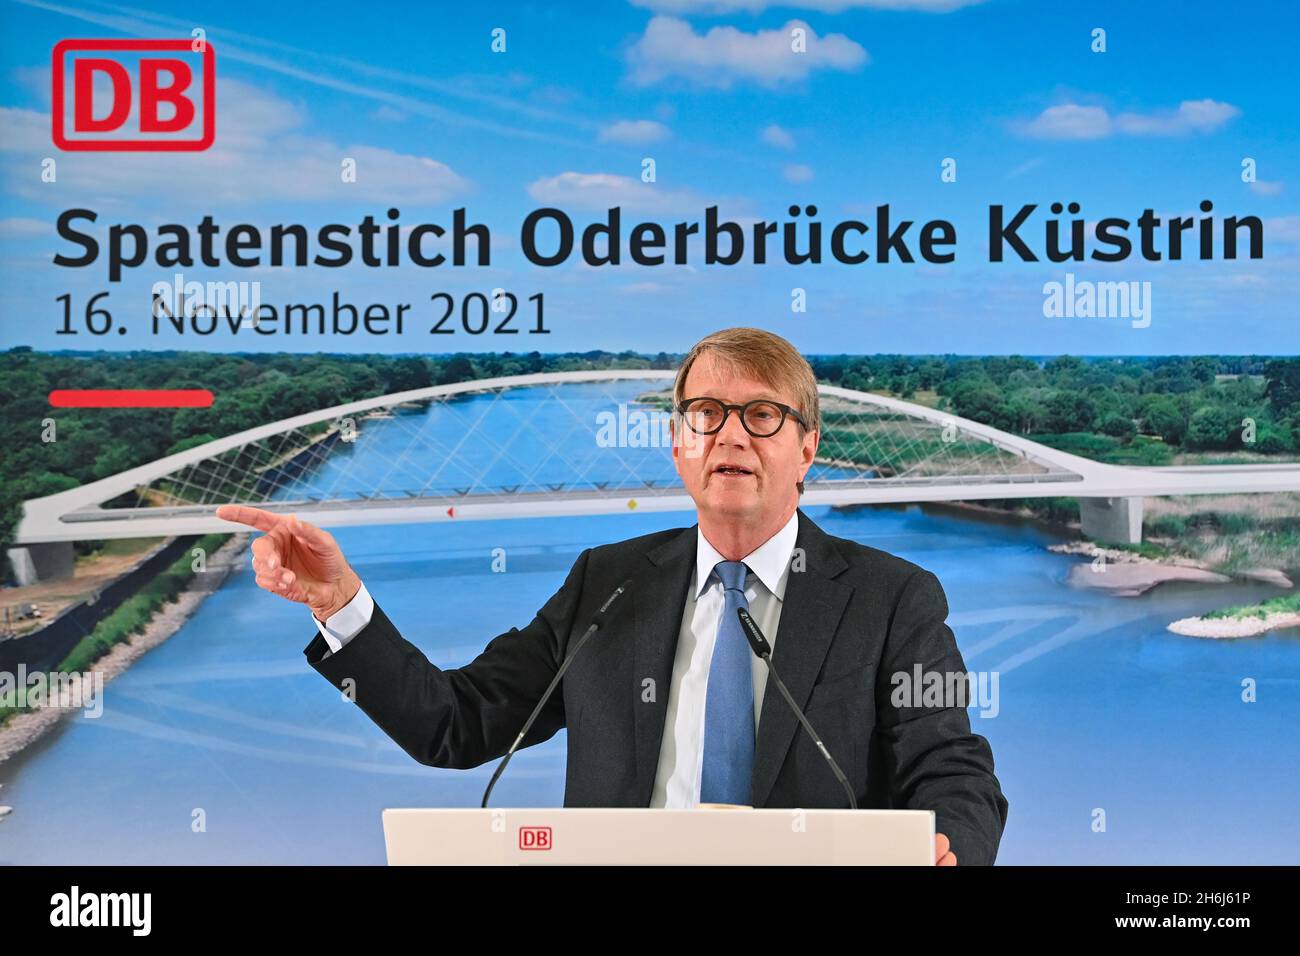 16 November 2021, Brandenburg, Küstrin-Kietz: Ronald Pofalla, Member of the Board of Management of Deutsche Bahn, speaks at the laying of the foundation stone for the railway bridge over the German-Polish border river Oder. The federal government is investing around 65 million euros in the construction. According to its own information, the new railway bridge is unique worldwide. The 260-meter-long network arch bridge's supporting cables, the so-called hangers, are made of carbon. The material, which is significantly more elastic than steel, and the innovative construction technology enable a Stock Photo